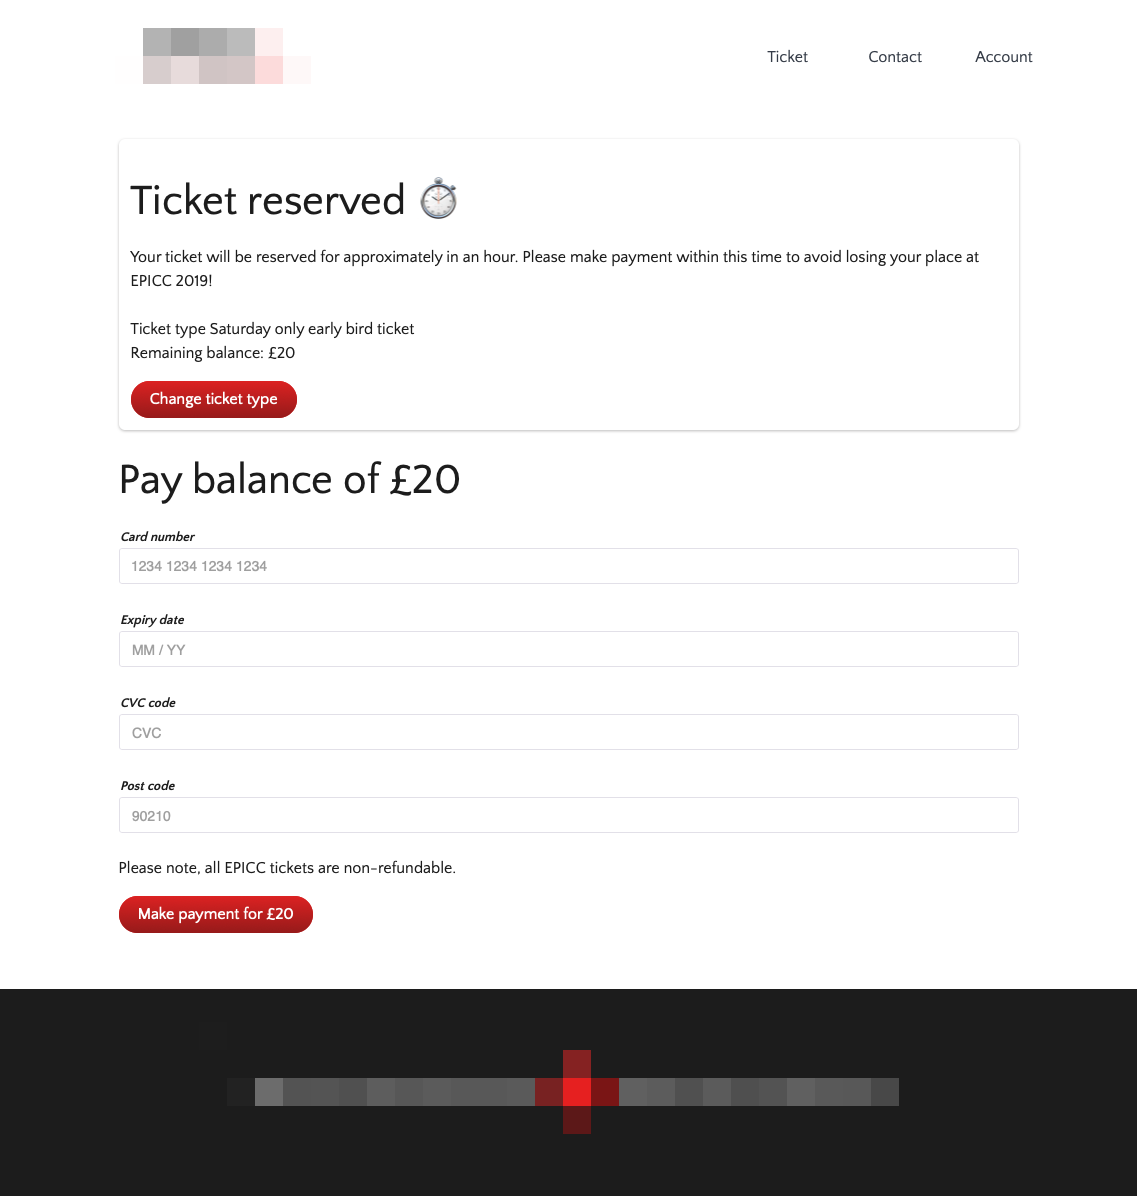 The EPICC conference ticket website payment page.